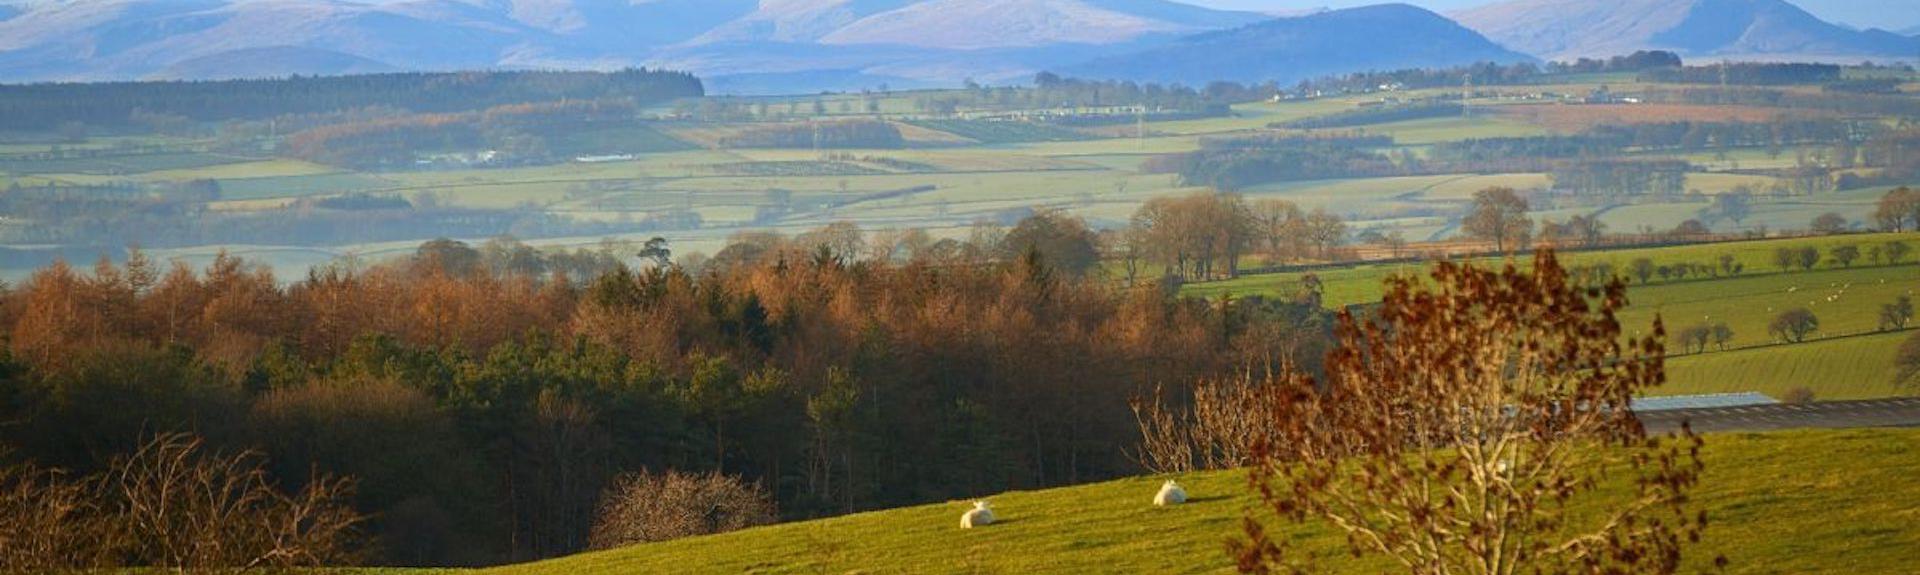 Find Pennine Holiday Cottages from South Yorkshire to Cumbria.